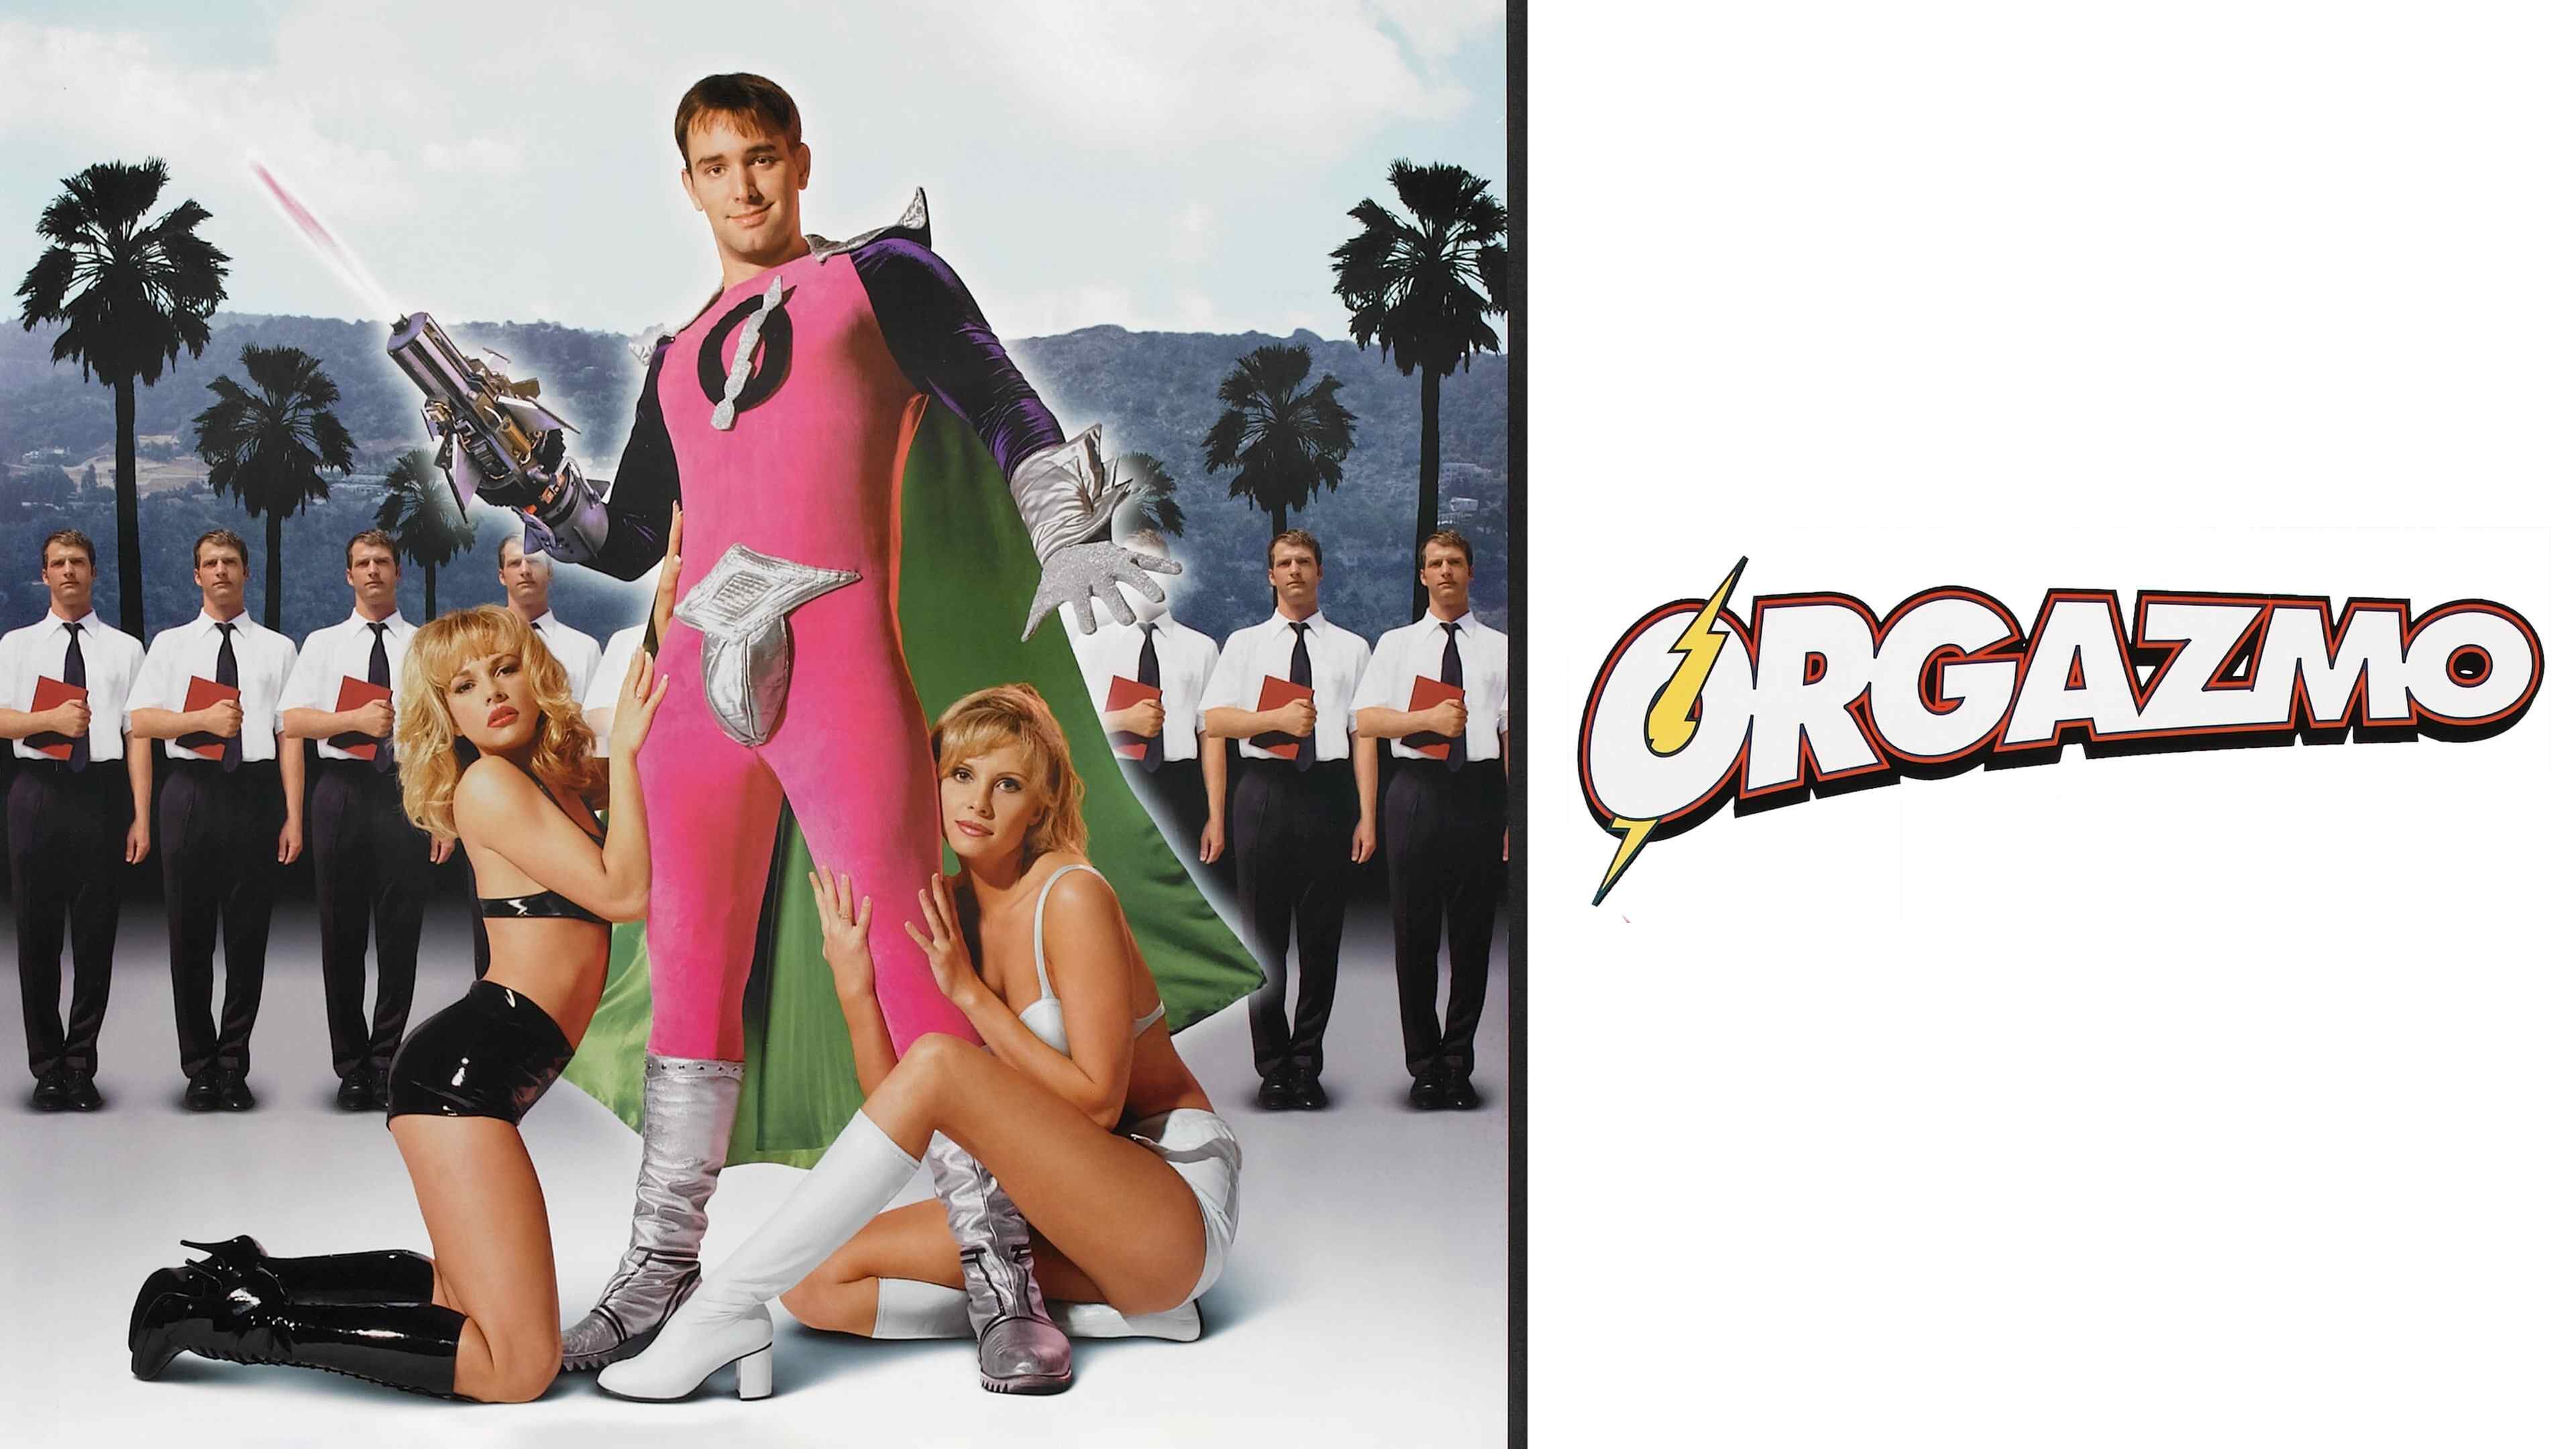 48-facts-about-the-movie-orgazmo